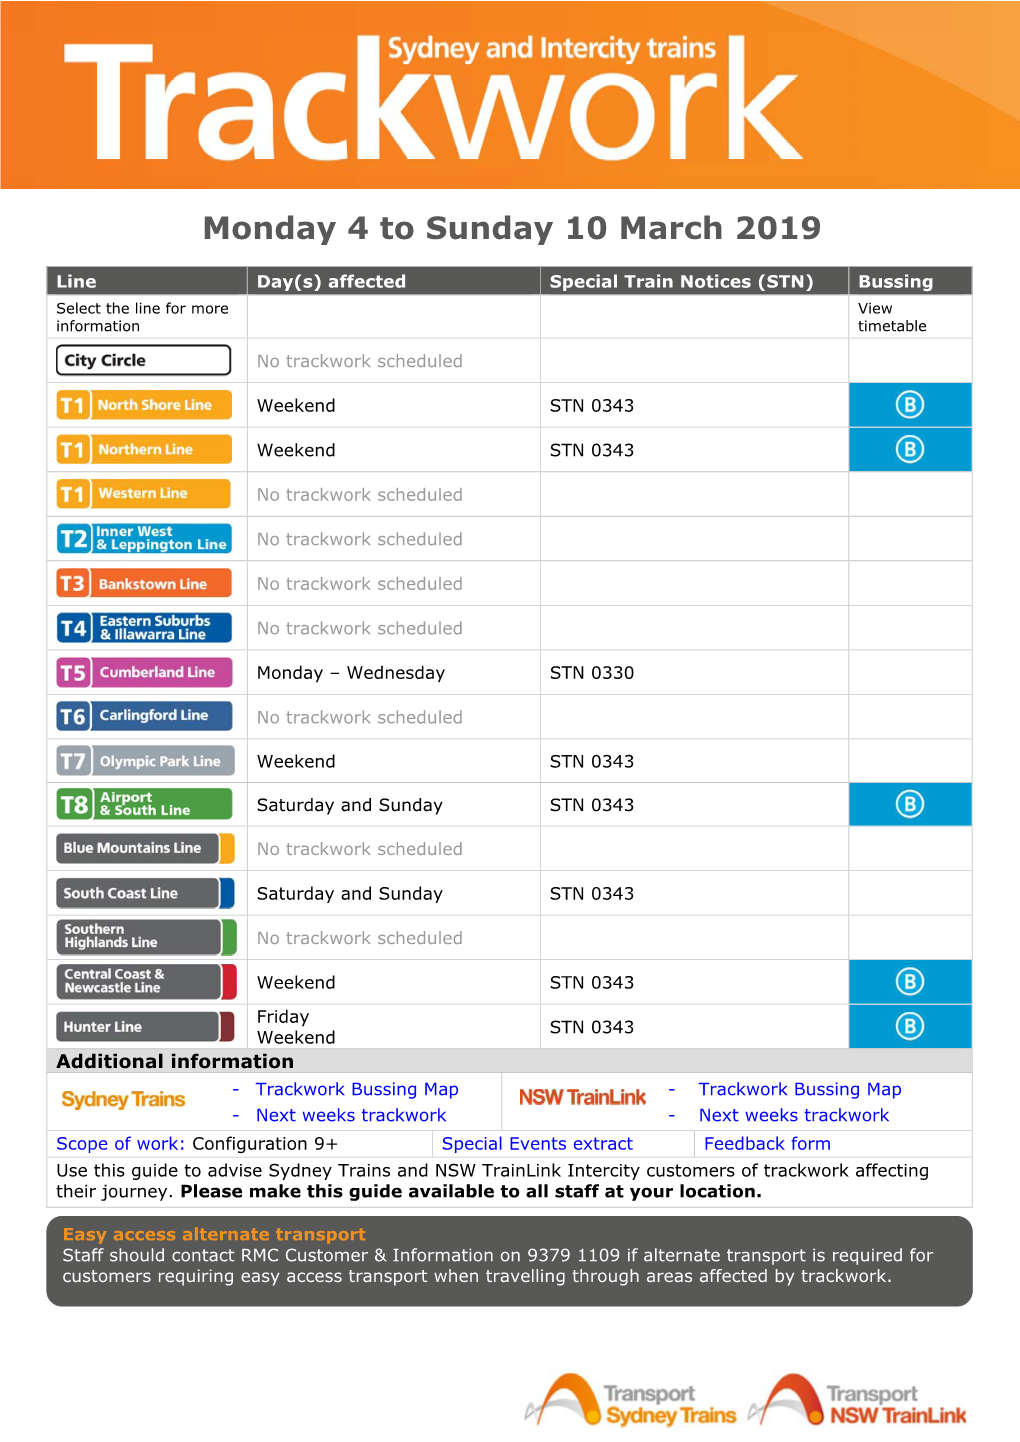 Monday 4 to Sunday 10 March 2019